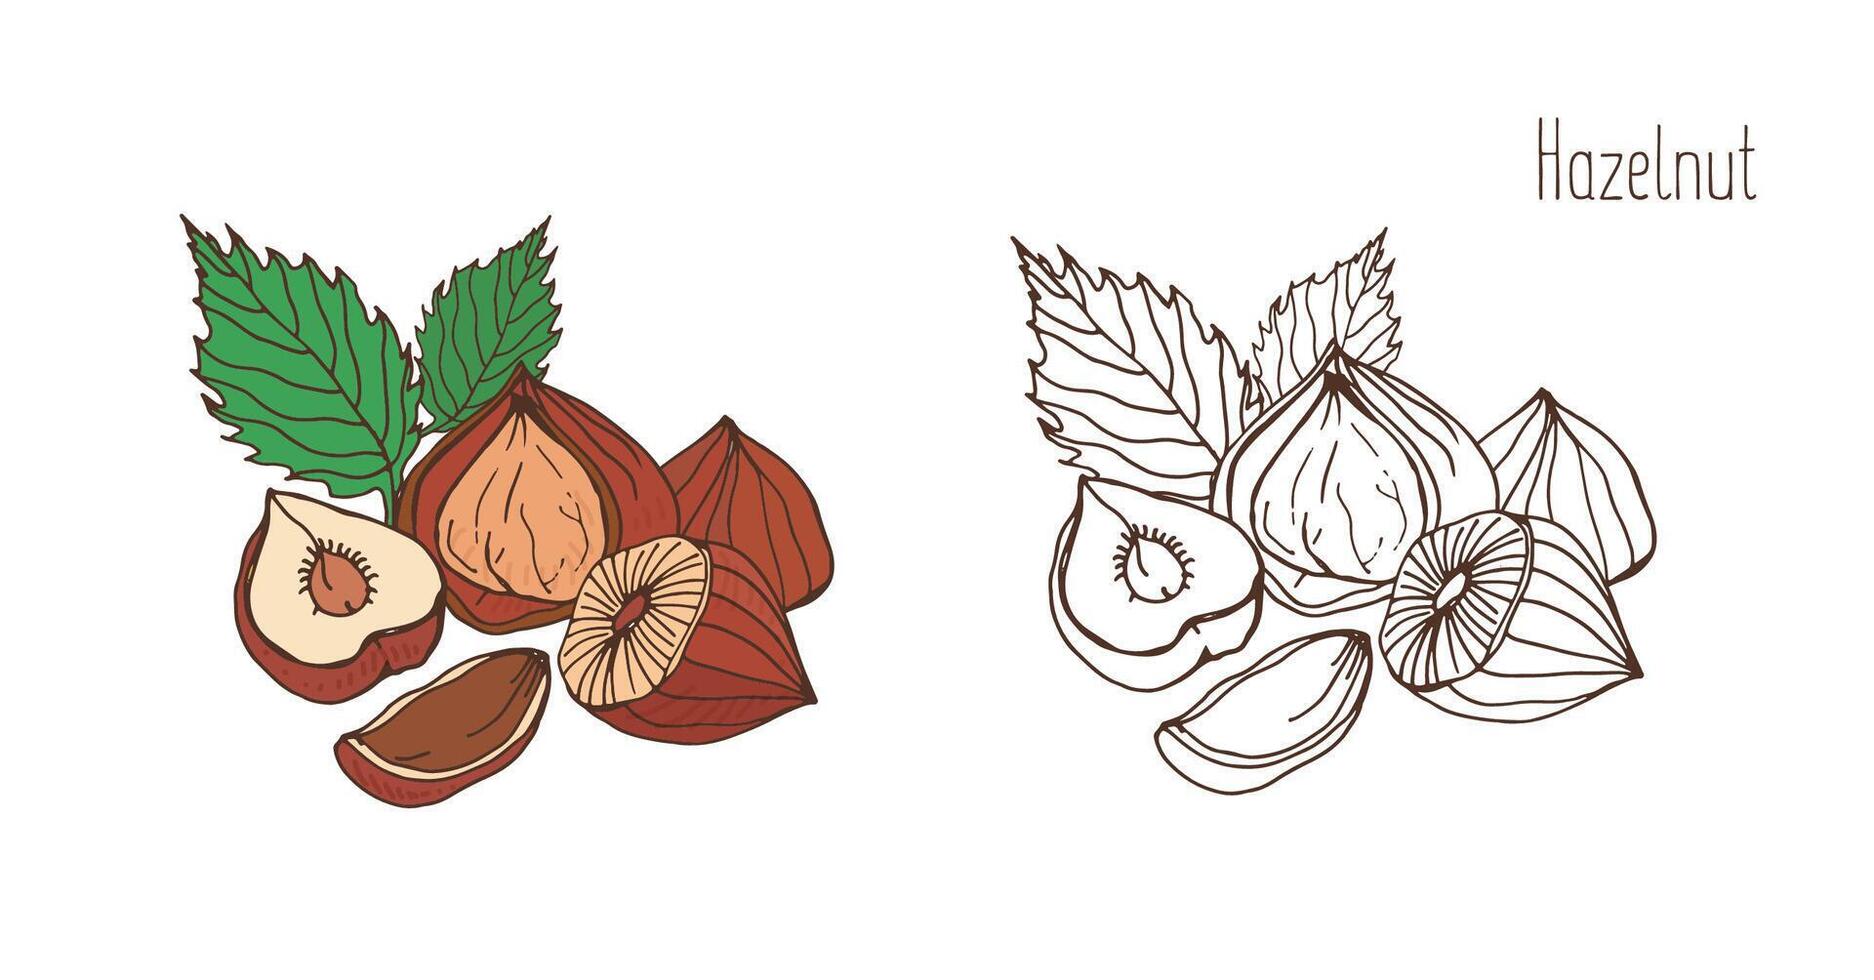 Colored and monochrome drawings of hazelnut with leaves. Delicious edible drupe or nut hand drawn in elegant vintage style. Natural vector illustration.